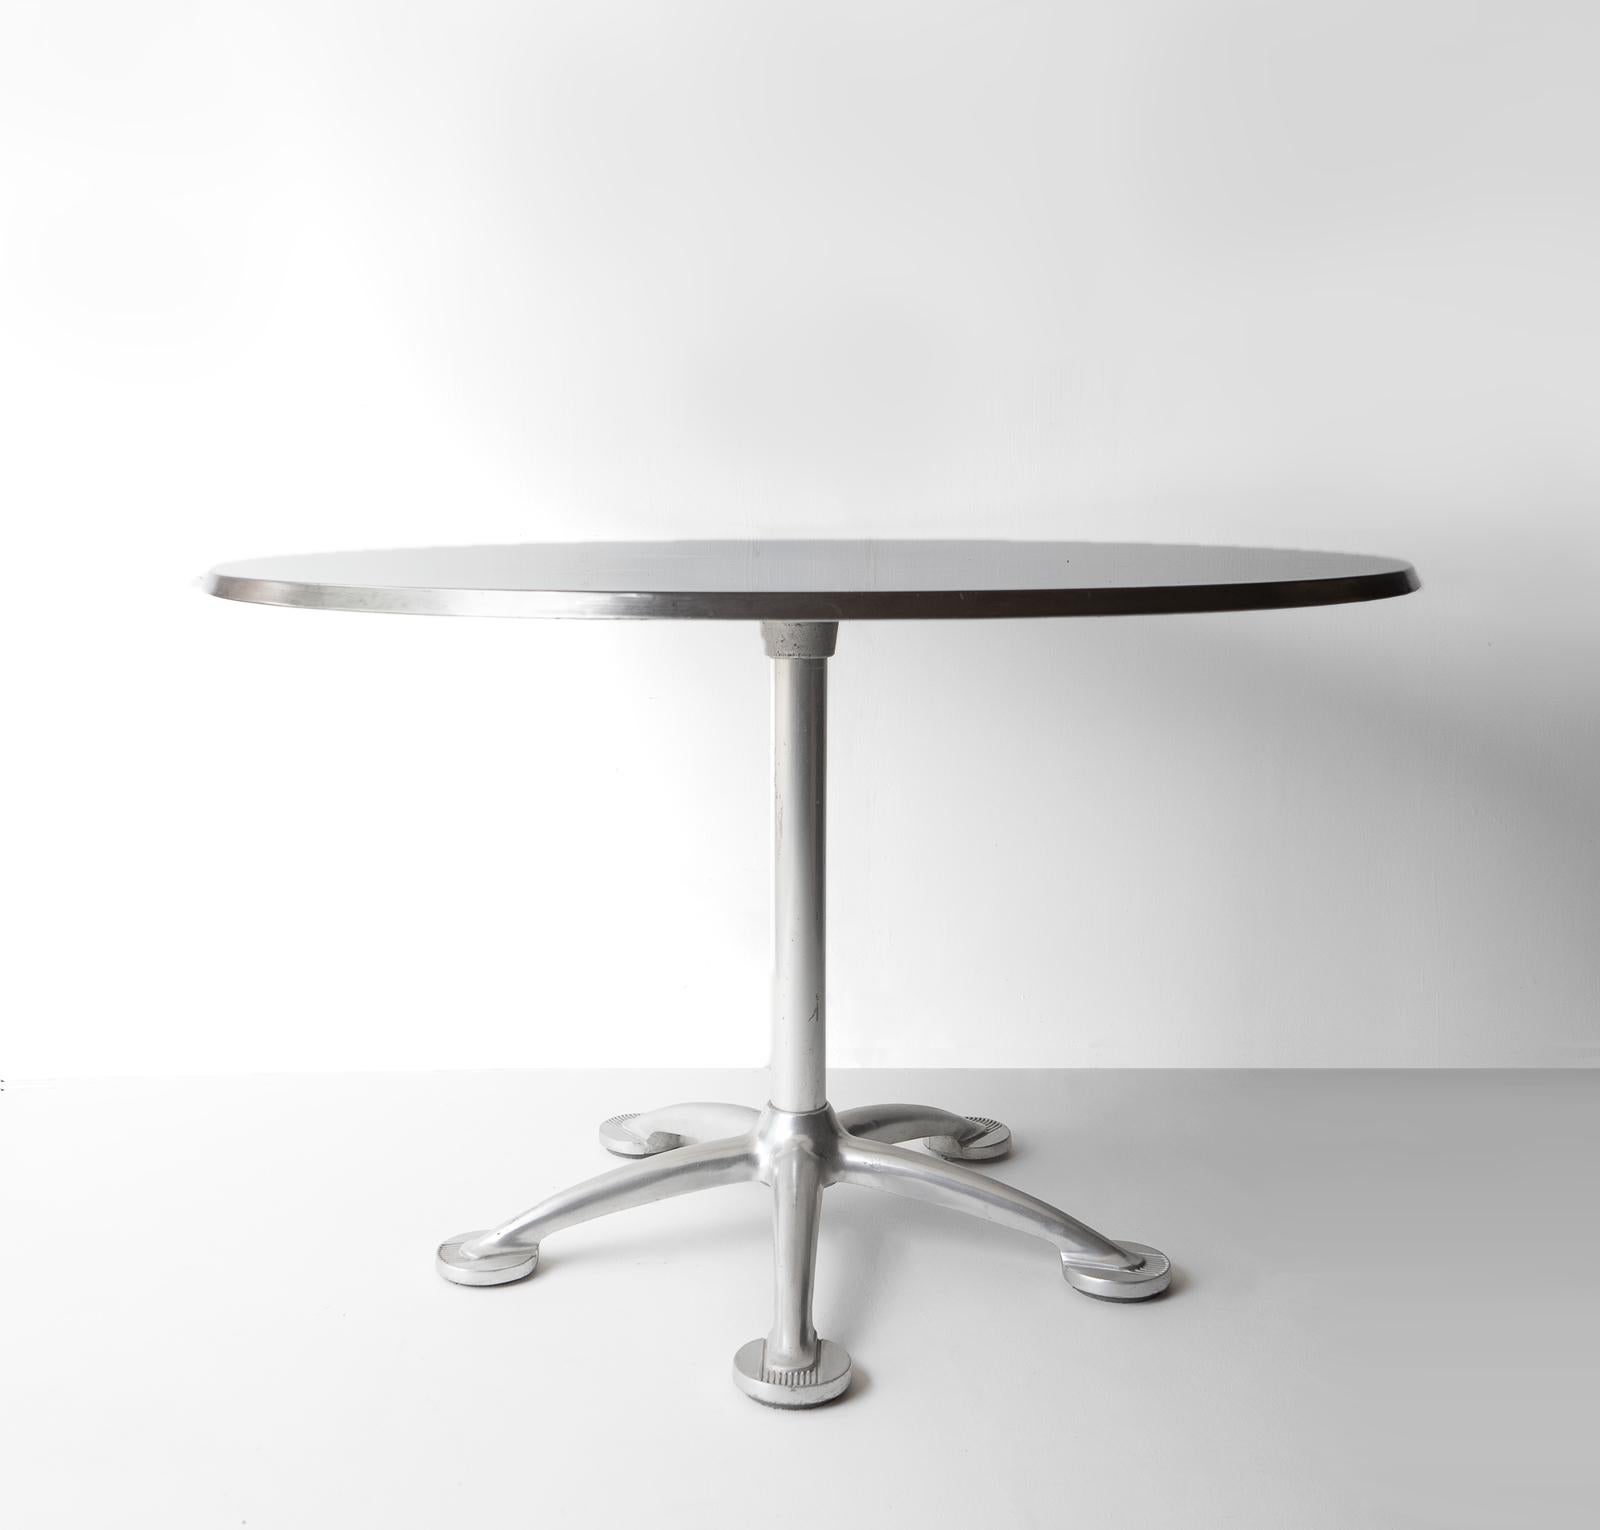 Large Vintage Circular Indoor/Outdoor Bistro Table By Jorge Pensi For Amat In Good Condition For Sale In Bristol, GB